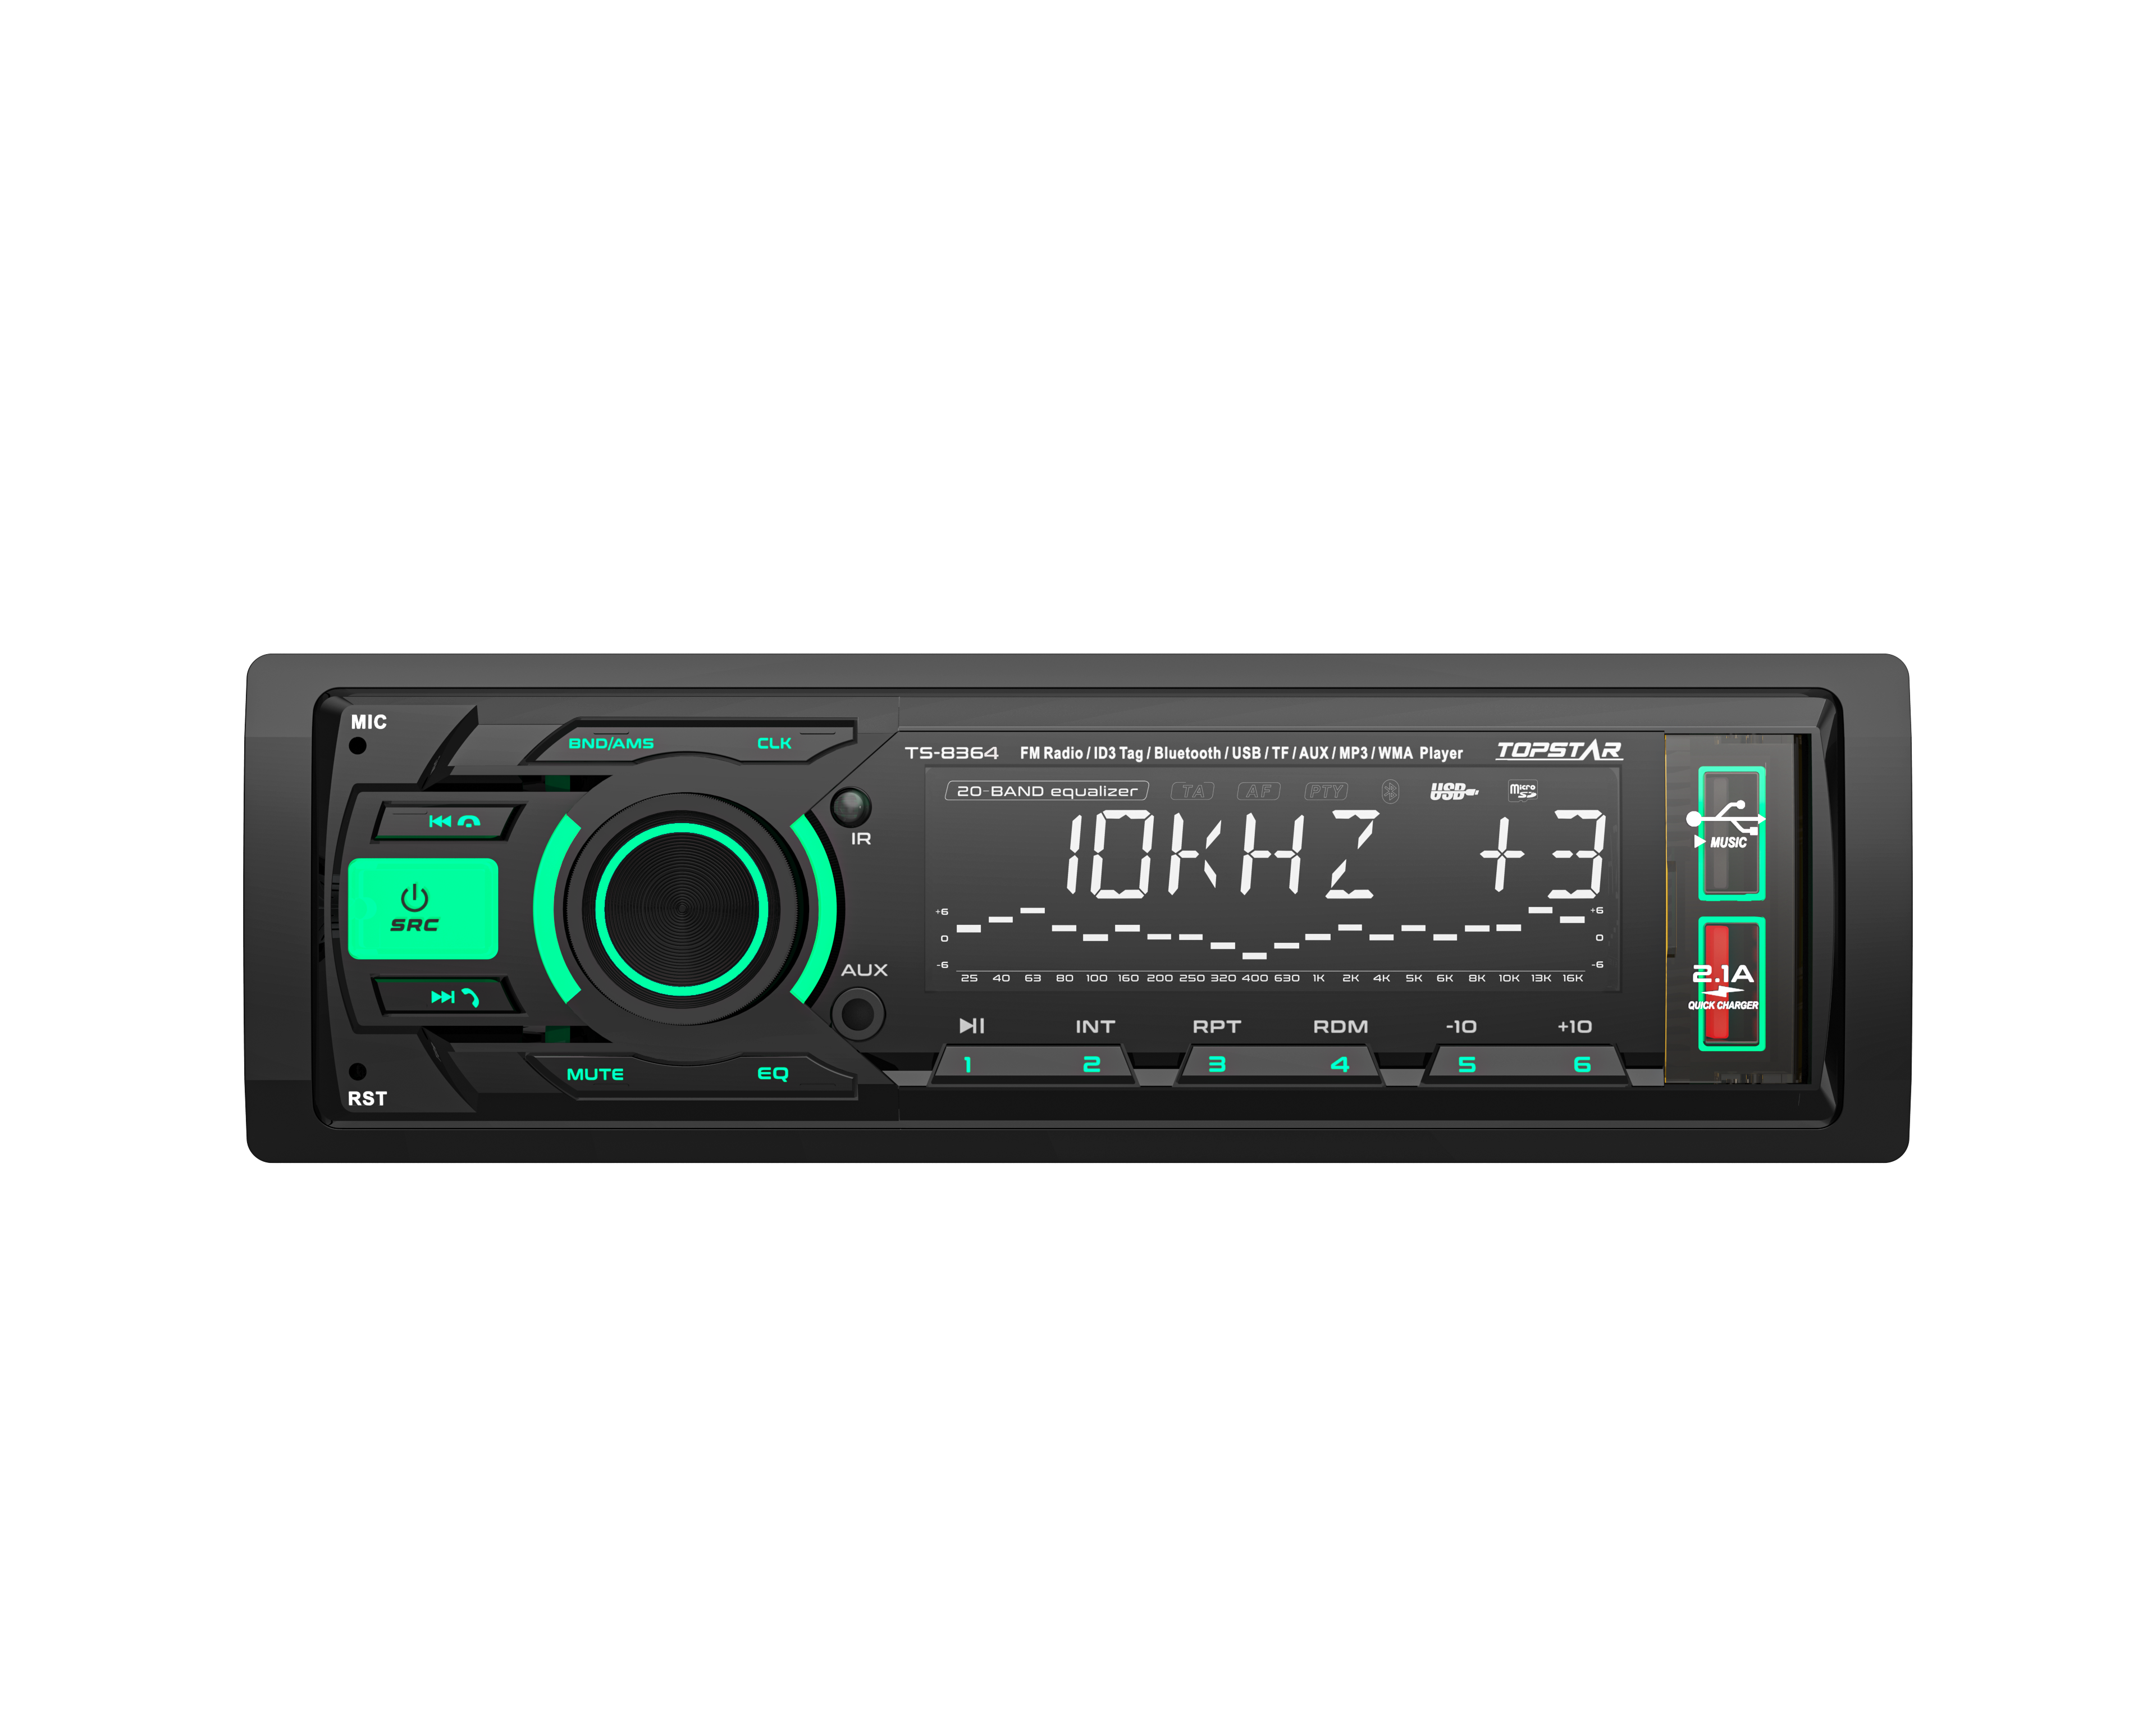  MP3 Player Car Stereo with Remote Control